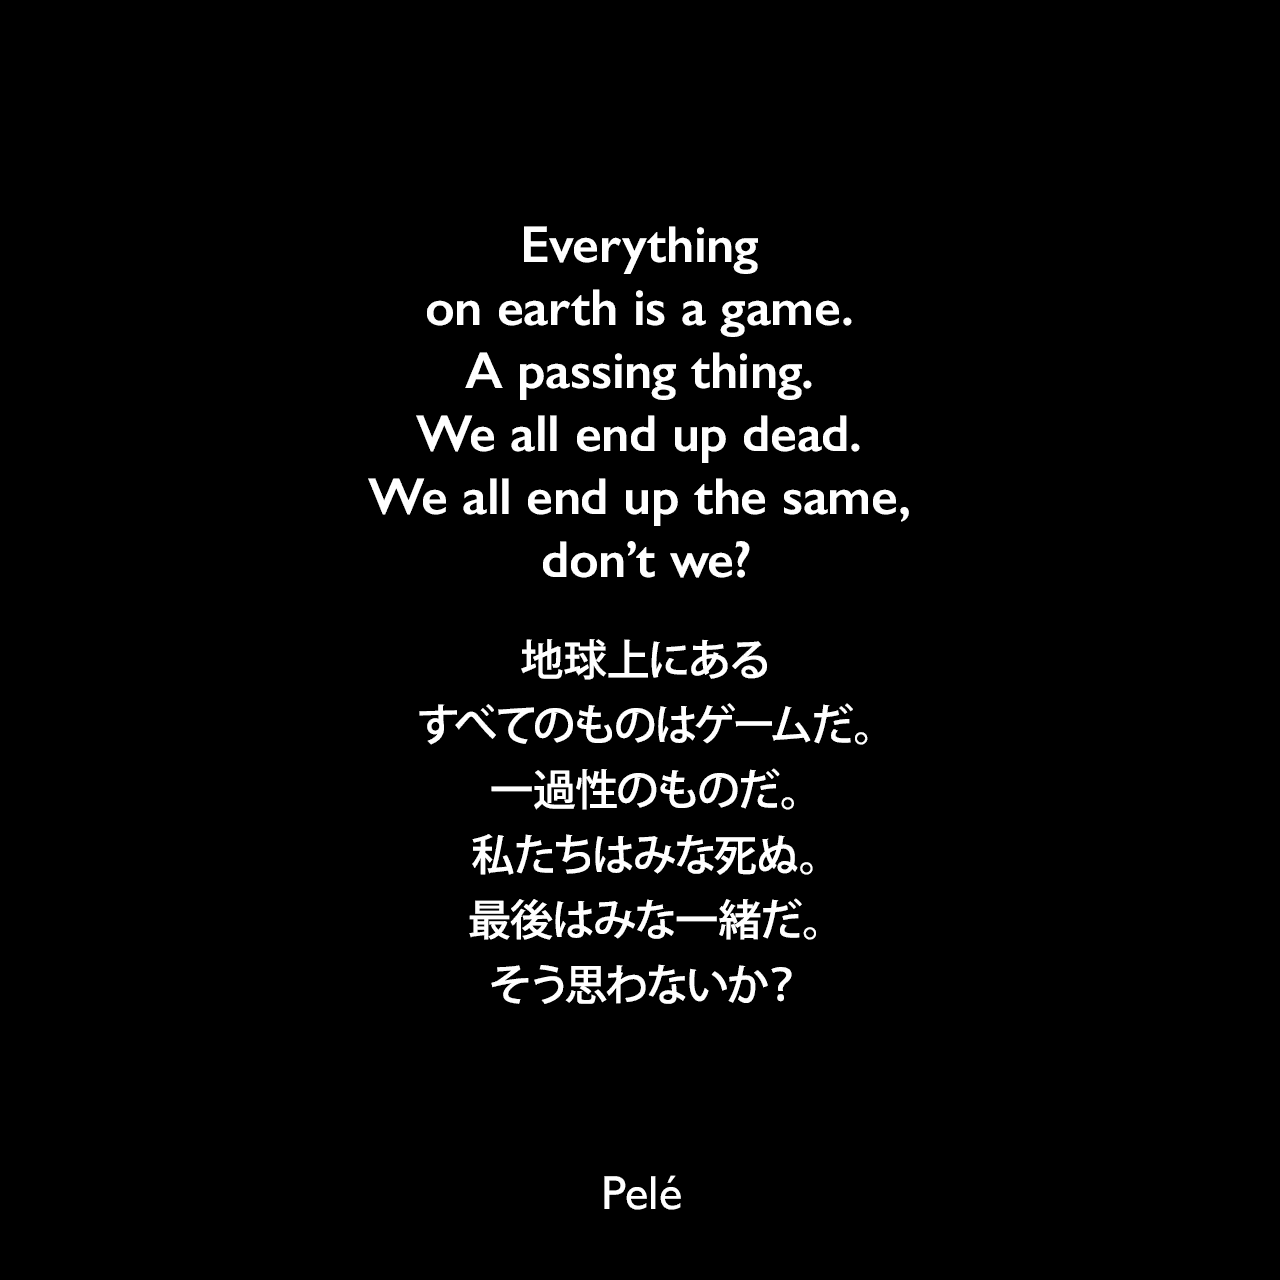 Everything on earth is a game. A passing thing. We all end up dead. We all end up the same, don’t we?地球上にあるすべてのものはゲームだ。一過性のものだ。私たちはみな死ぬ。最後はみな一緒だ。そう思わないか？Pelé